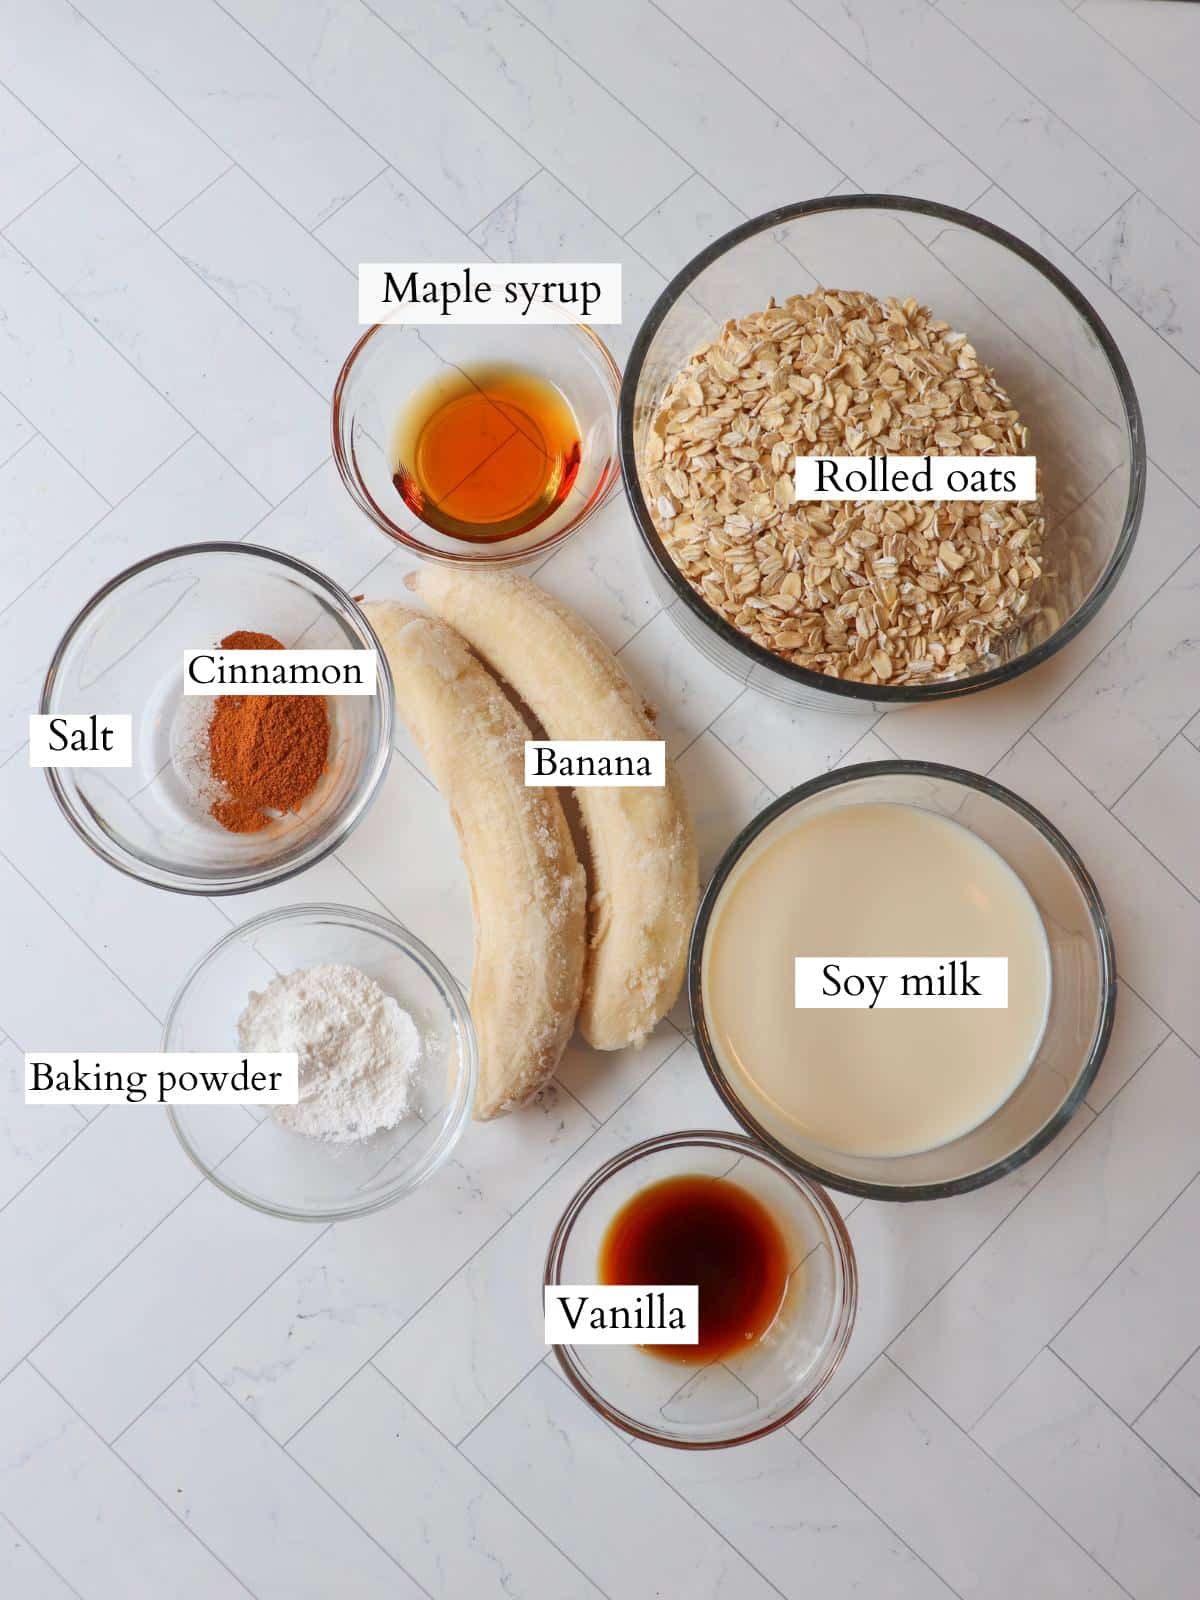 Ingredients for vegan banana oatmeal pancakes laid out in small glass bowls on a kitchen counter.